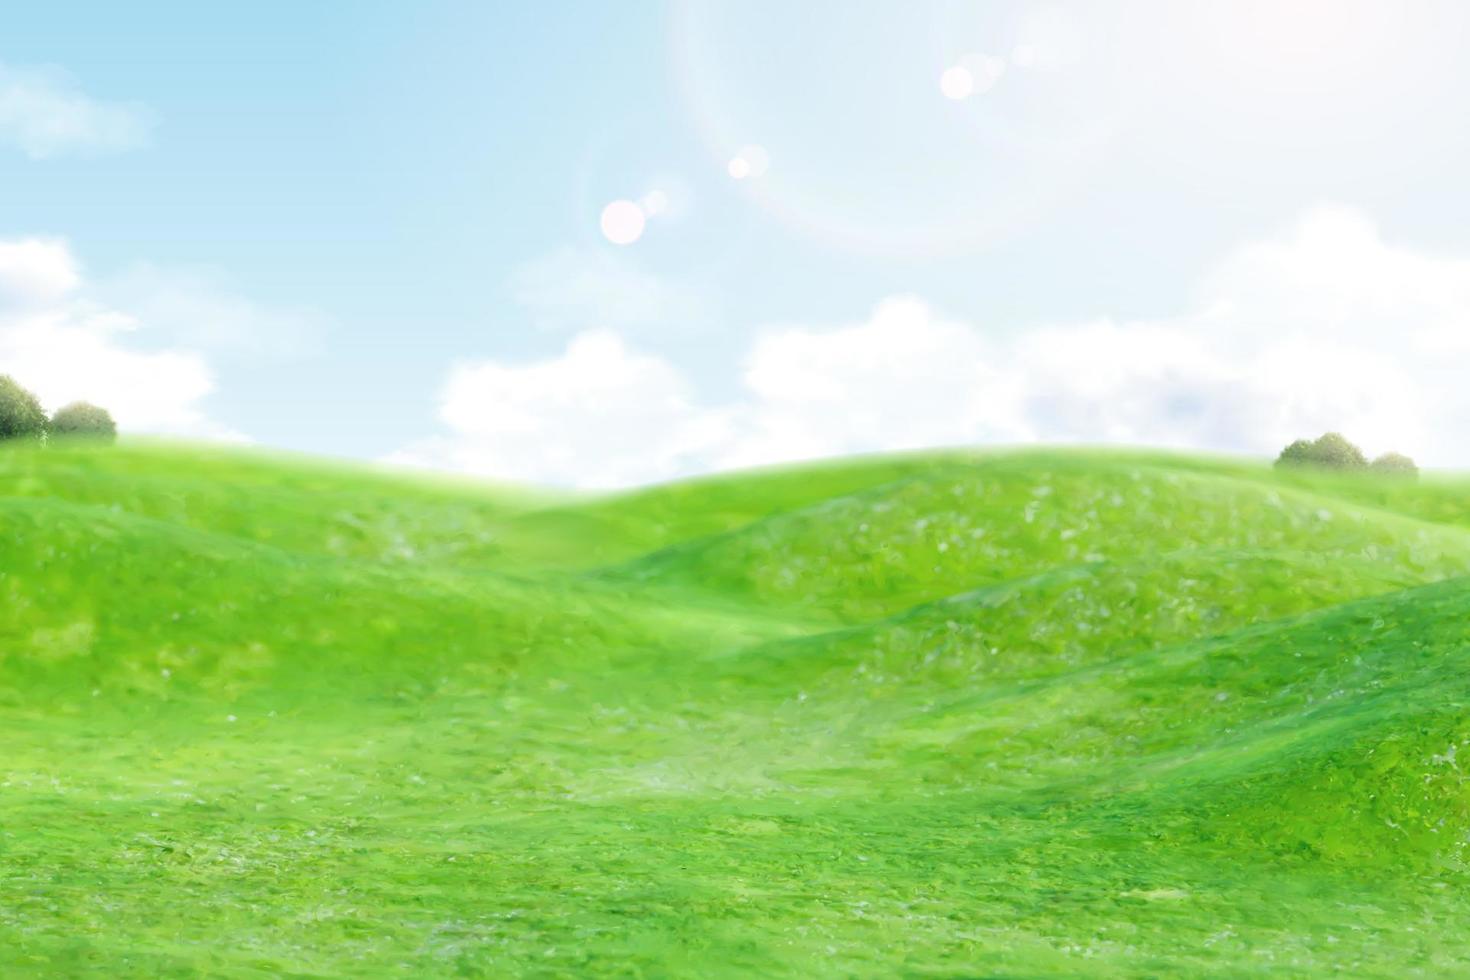 Green field with blue sky background in 3d illustration. Farm and country side concept. vector